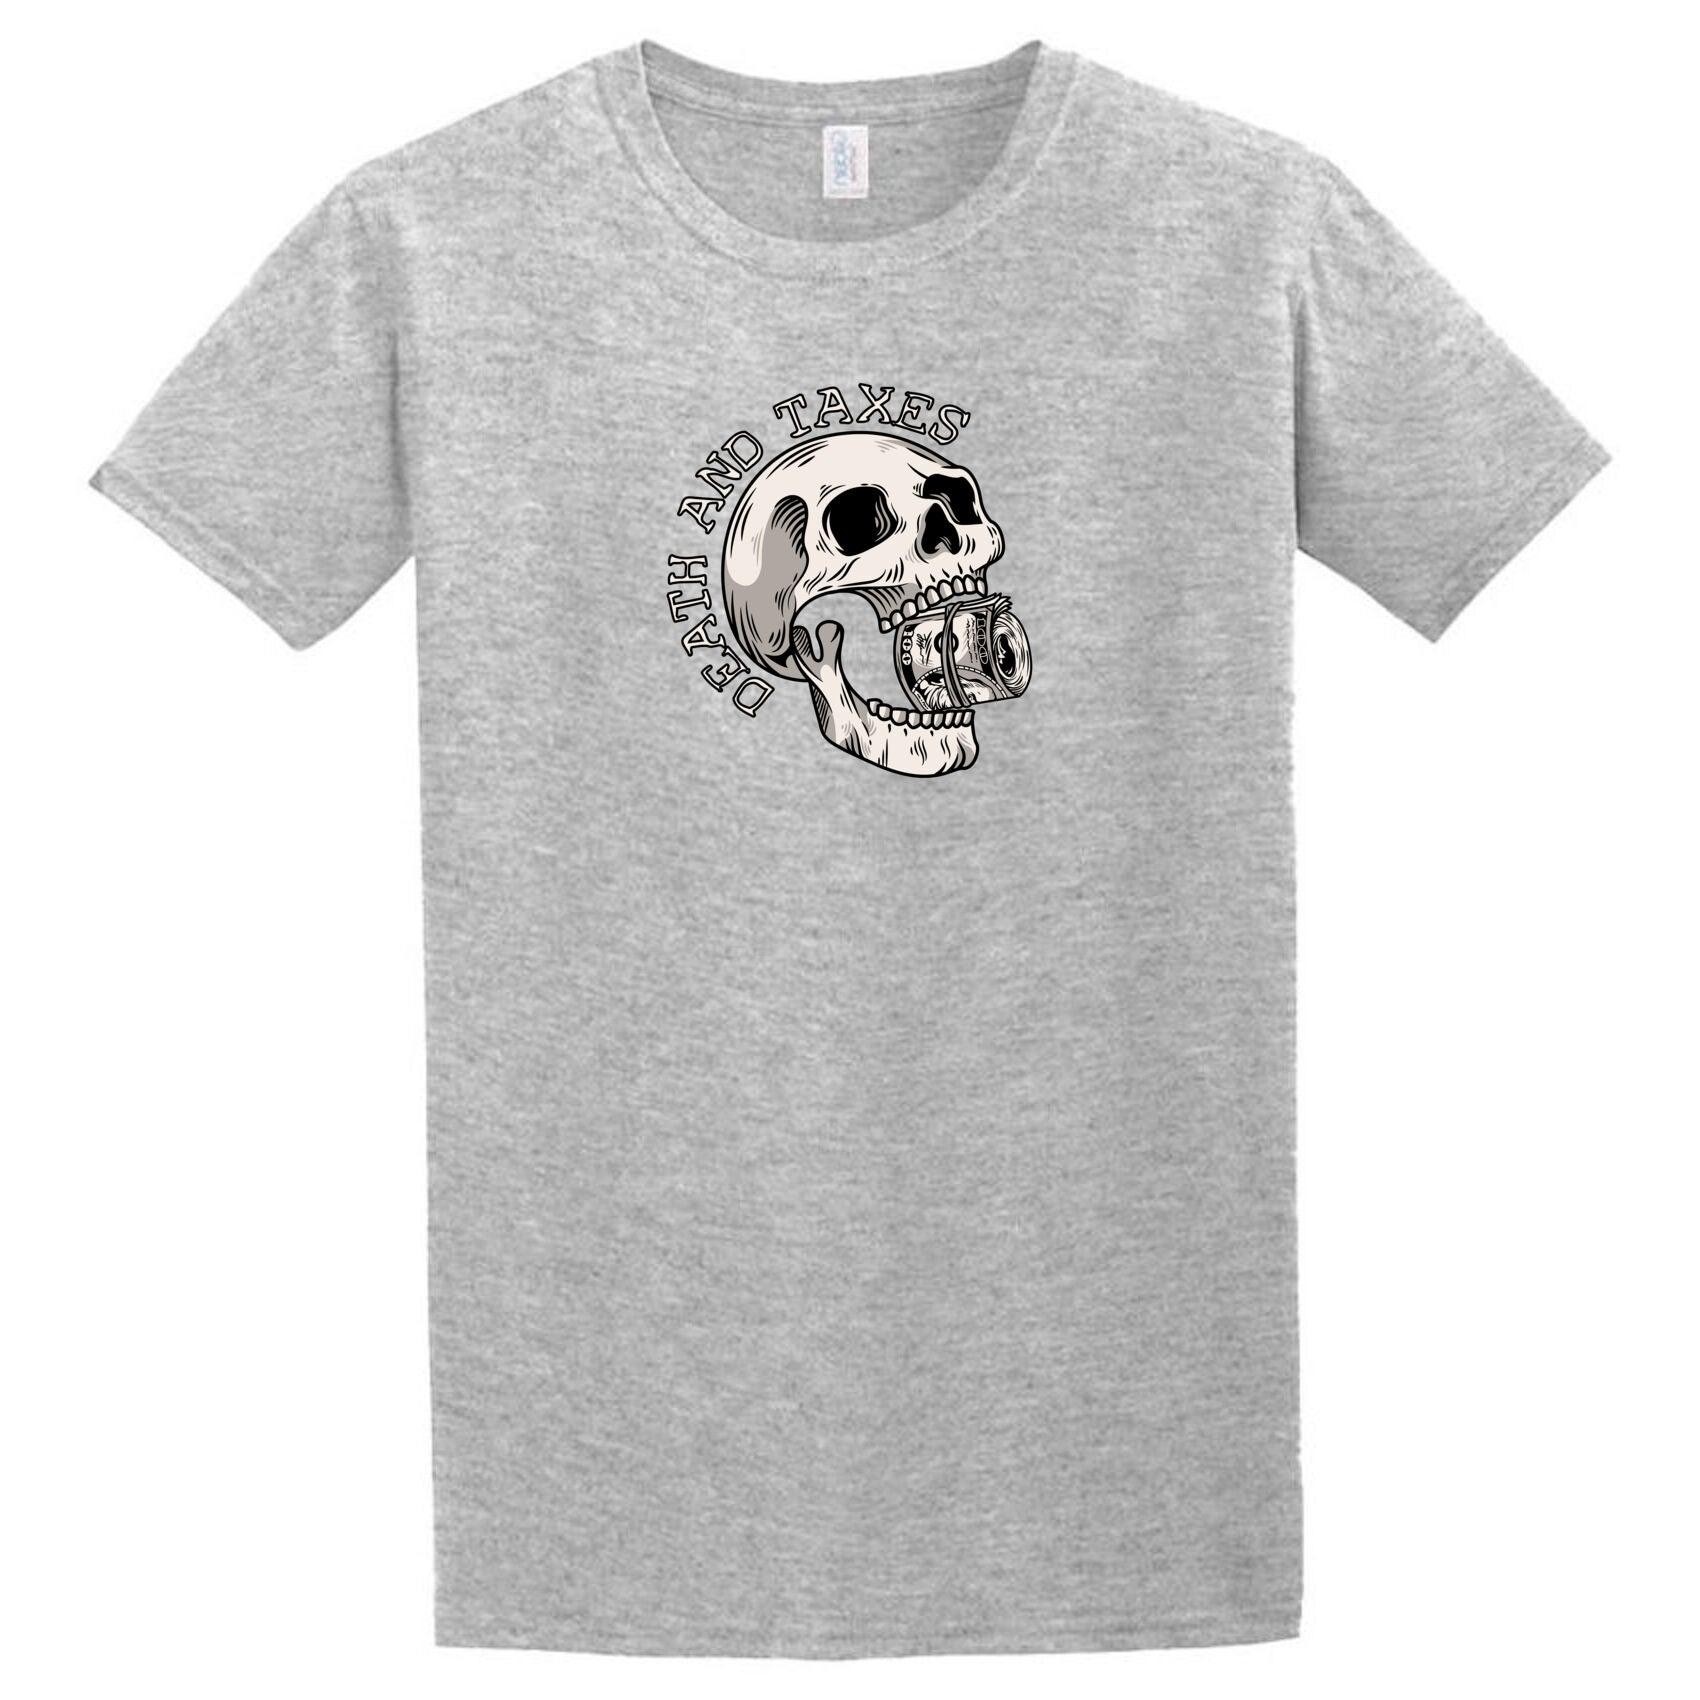 A Death And Taxes T-Shirt with a skull and crossbones on it by Twisted Gifts.